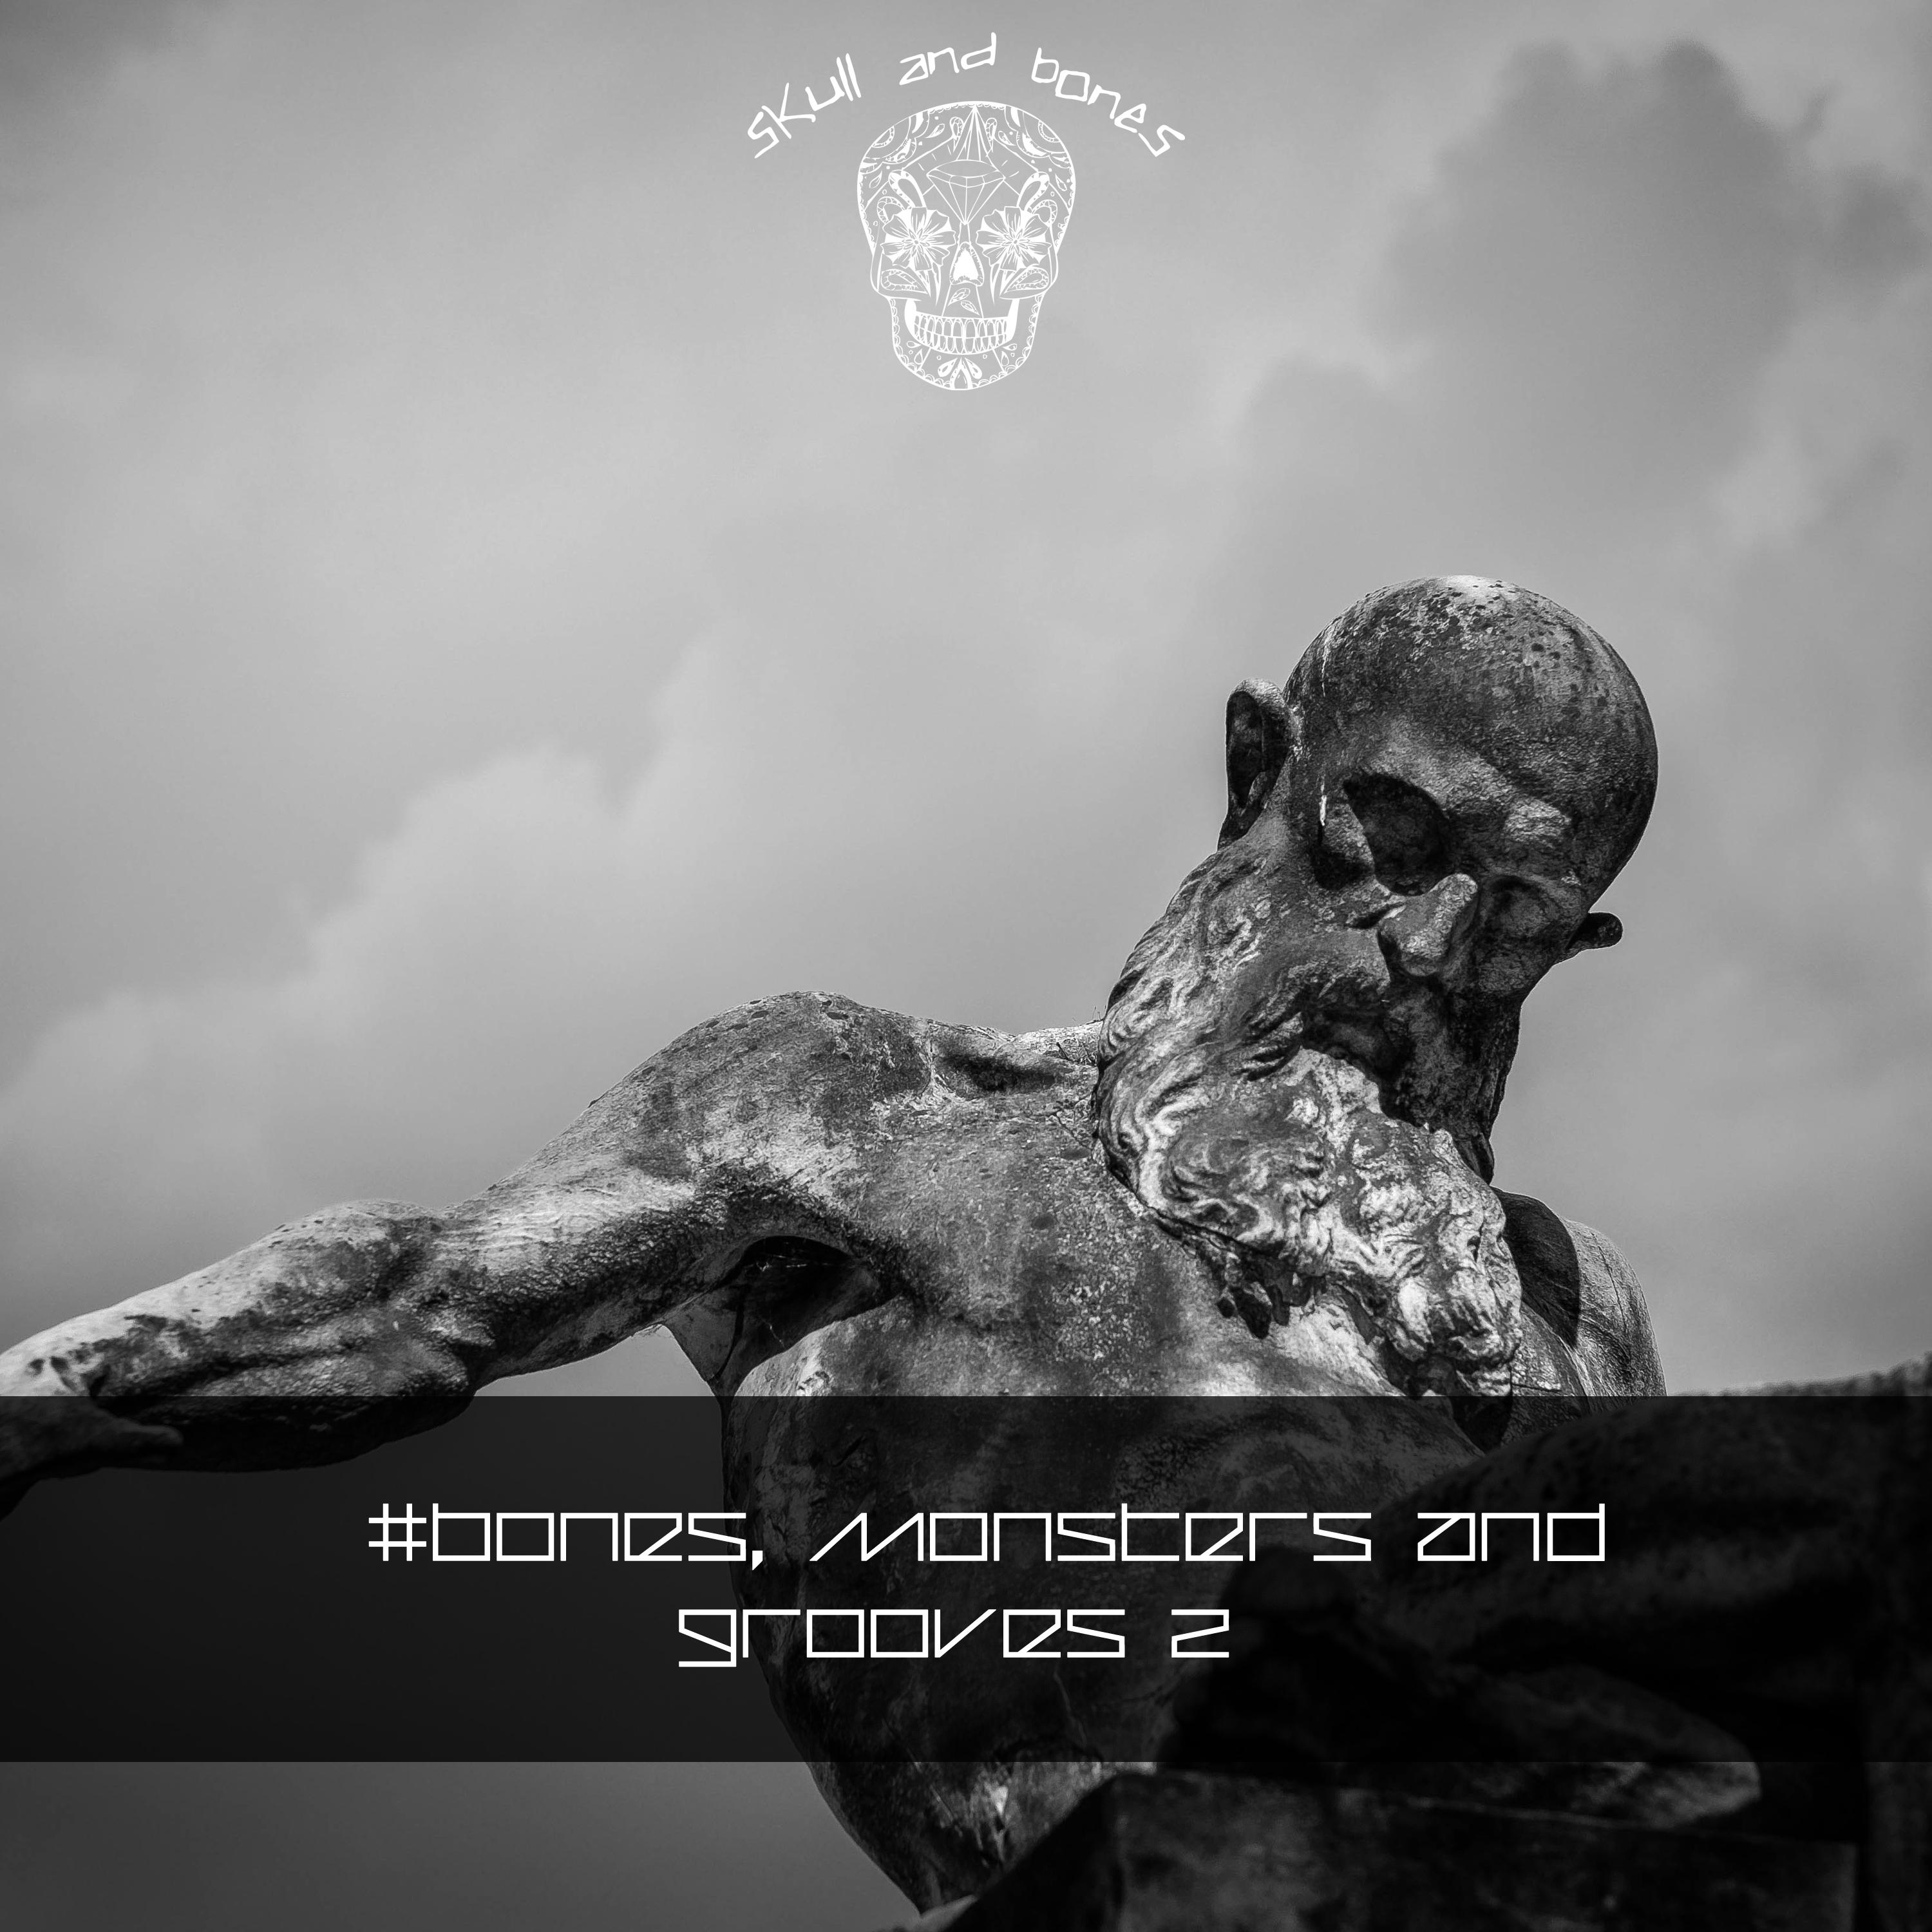 Bones, Monsters and Grooves 2